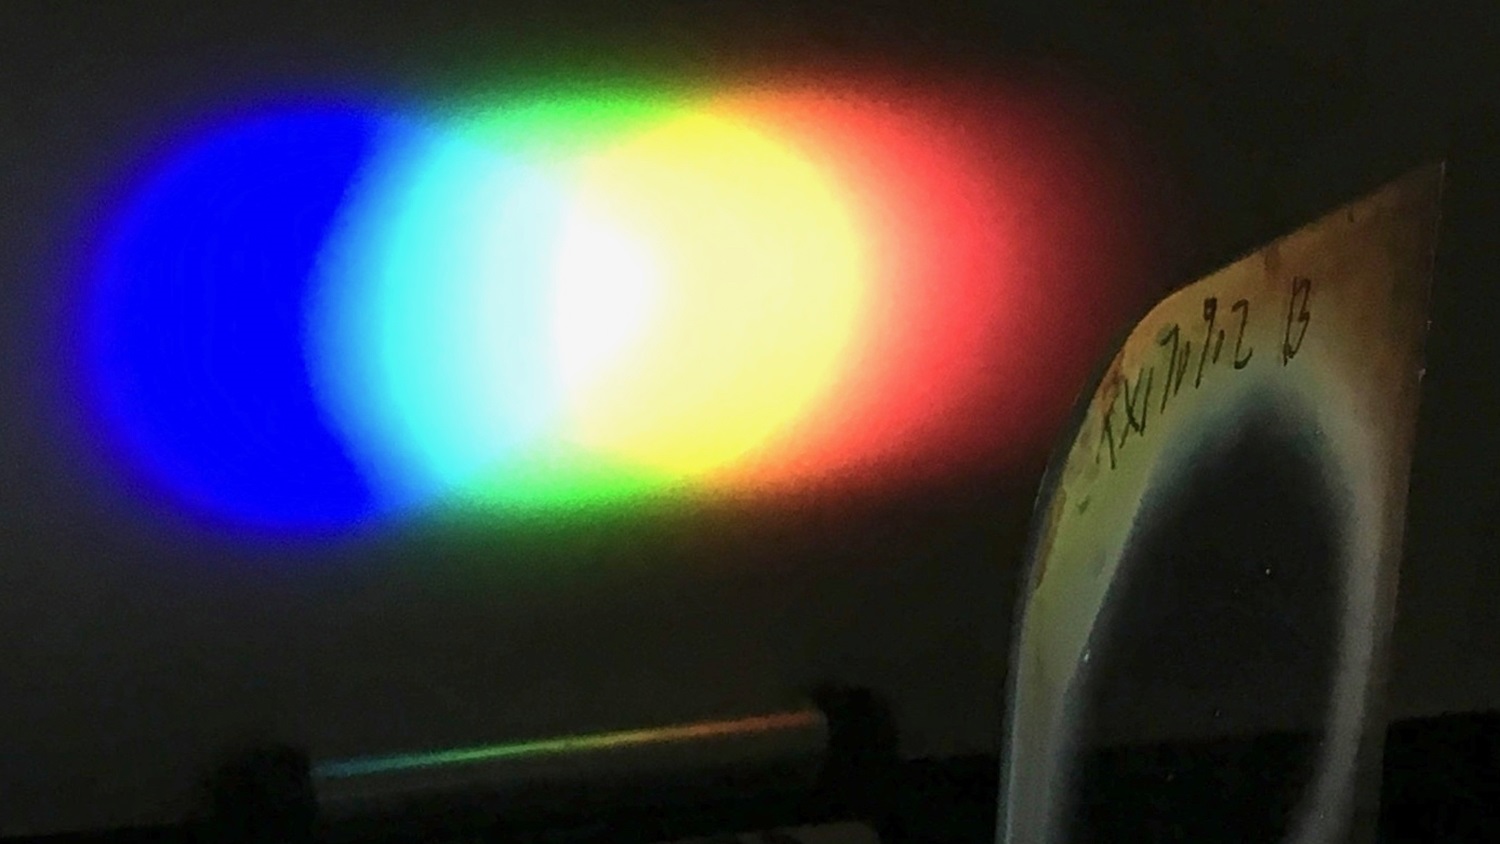 A one-inch diameter Bragg polarization grating diffracts white light from an LED flashlight onto a screen placed nearby